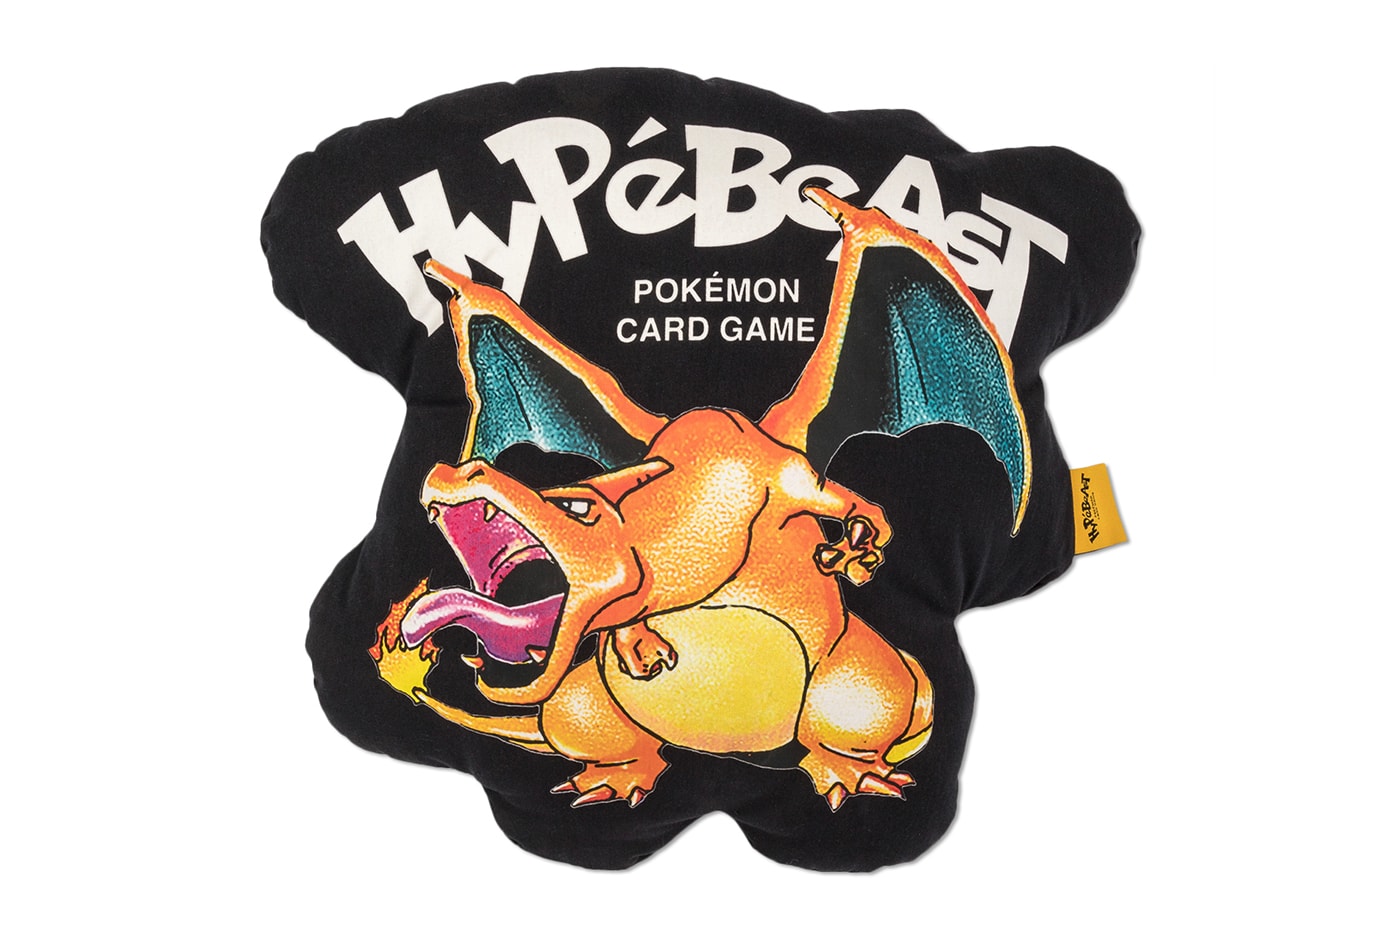 HYPEBEAST Pokémon TCG 25th Anniversary Capsule Collaboration Hoodies Phone Cases Release Where to buy